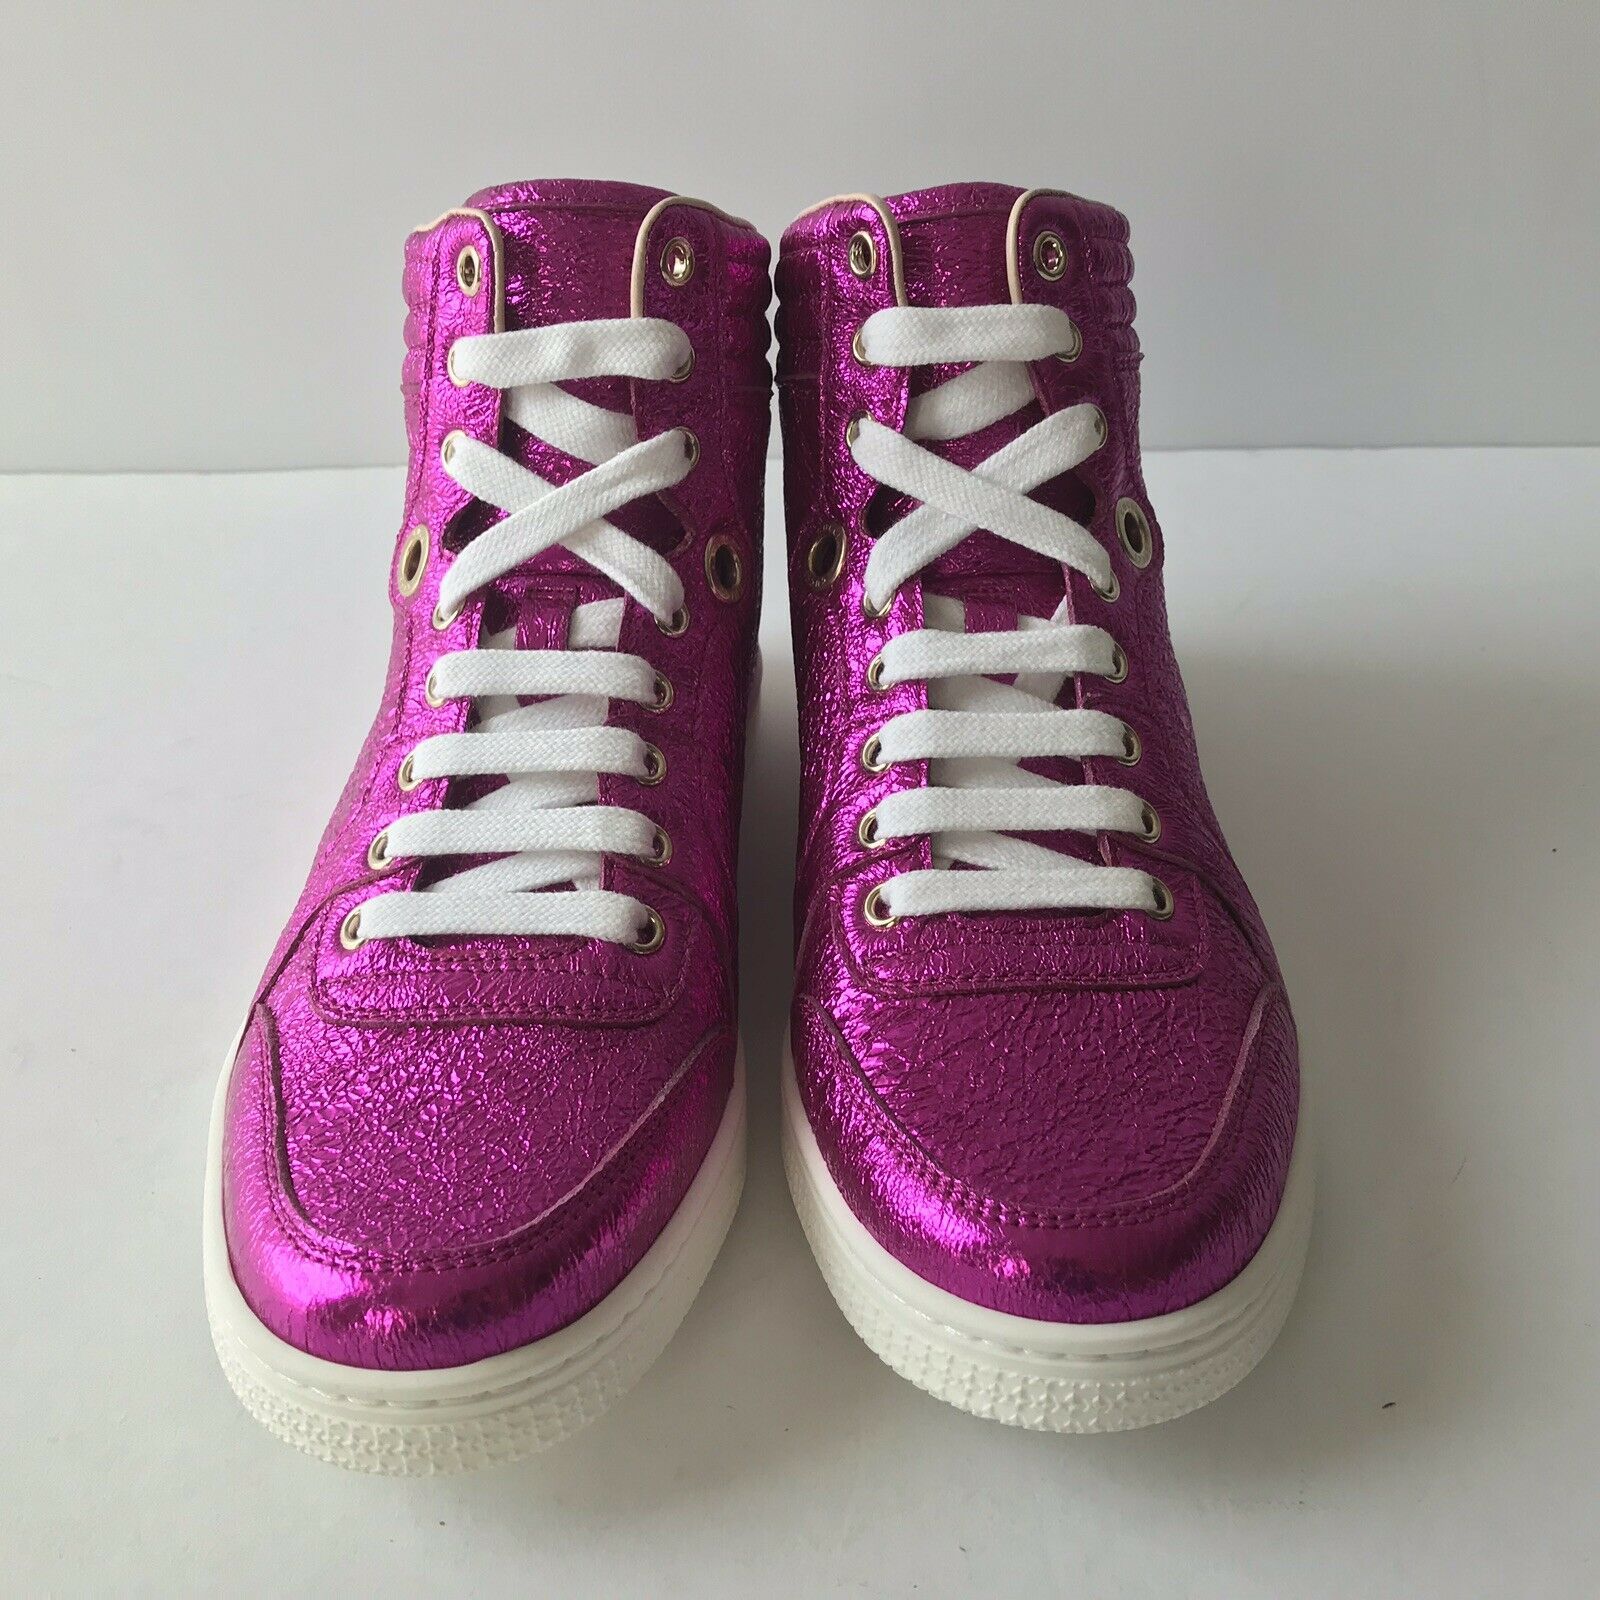 P-107200 New Gucci Purple Glitter Sneakers Size US 8 Marked 38 - Athletic